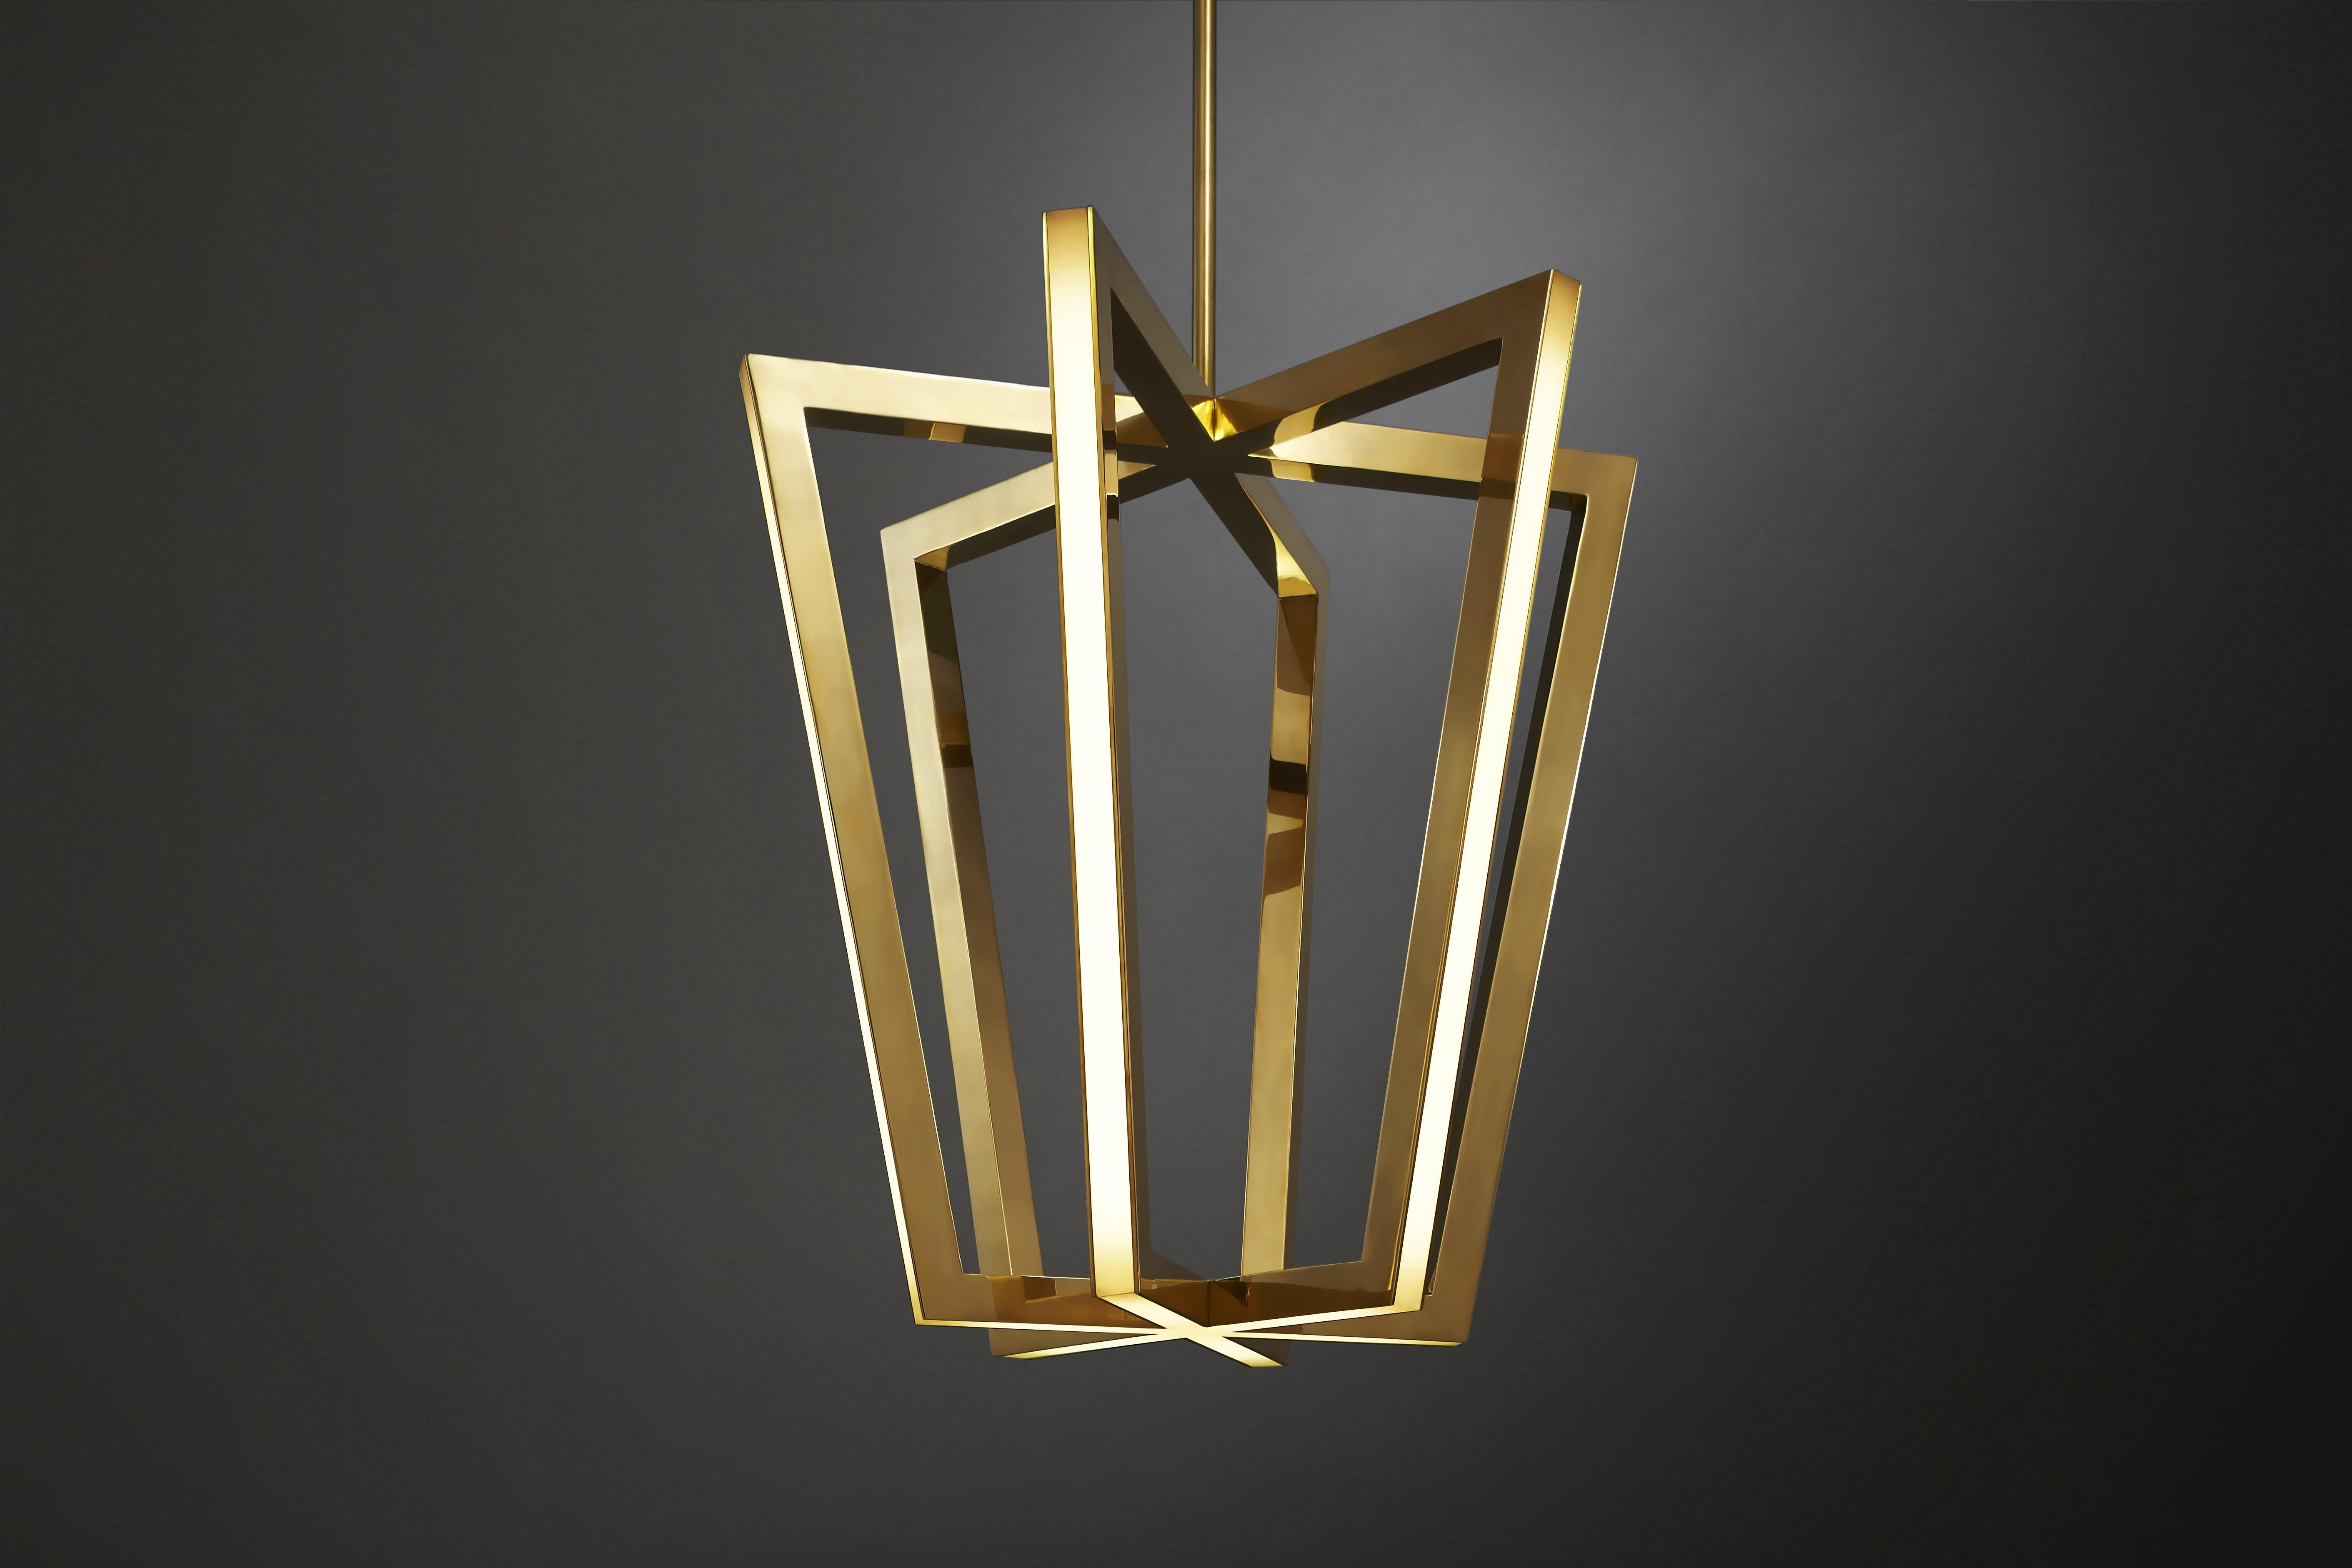 Contemporary polished brass pendant light - Asterix by Christopher Boots

Geometry, a core language of the ASTERIX series, is expressed as timeless objects of light. Reworking the concept of the traditional lantern to displace the light source